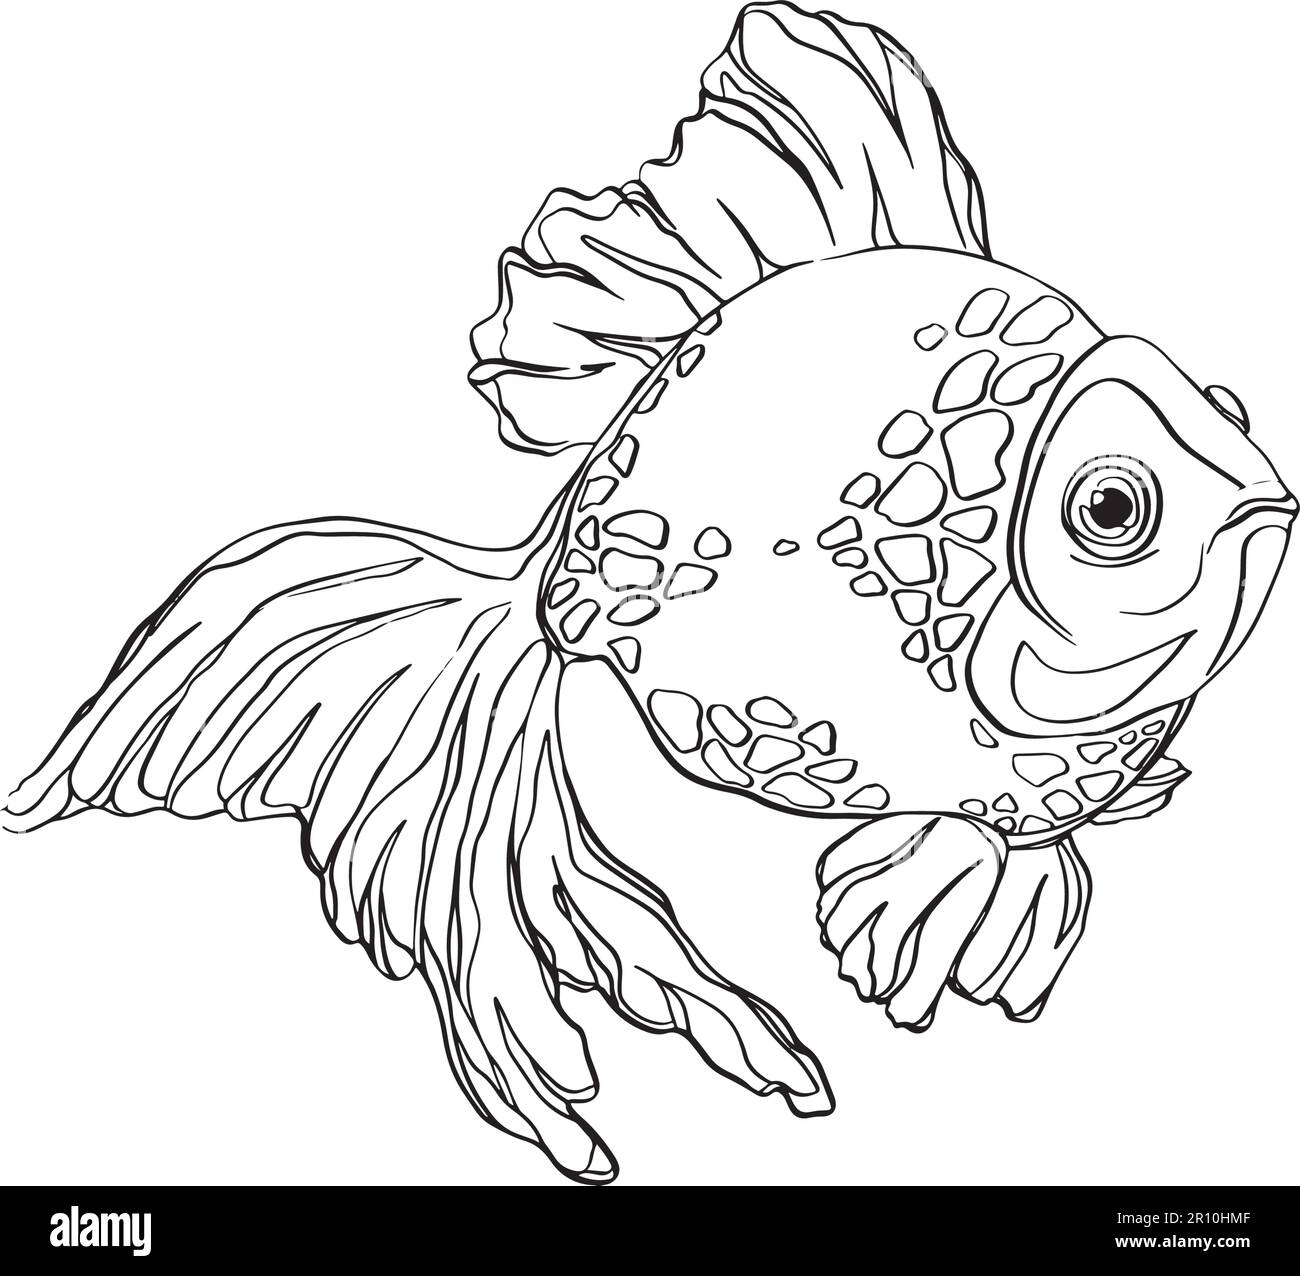 A Step-by-Step Guide: How To Draw Fish For Kids